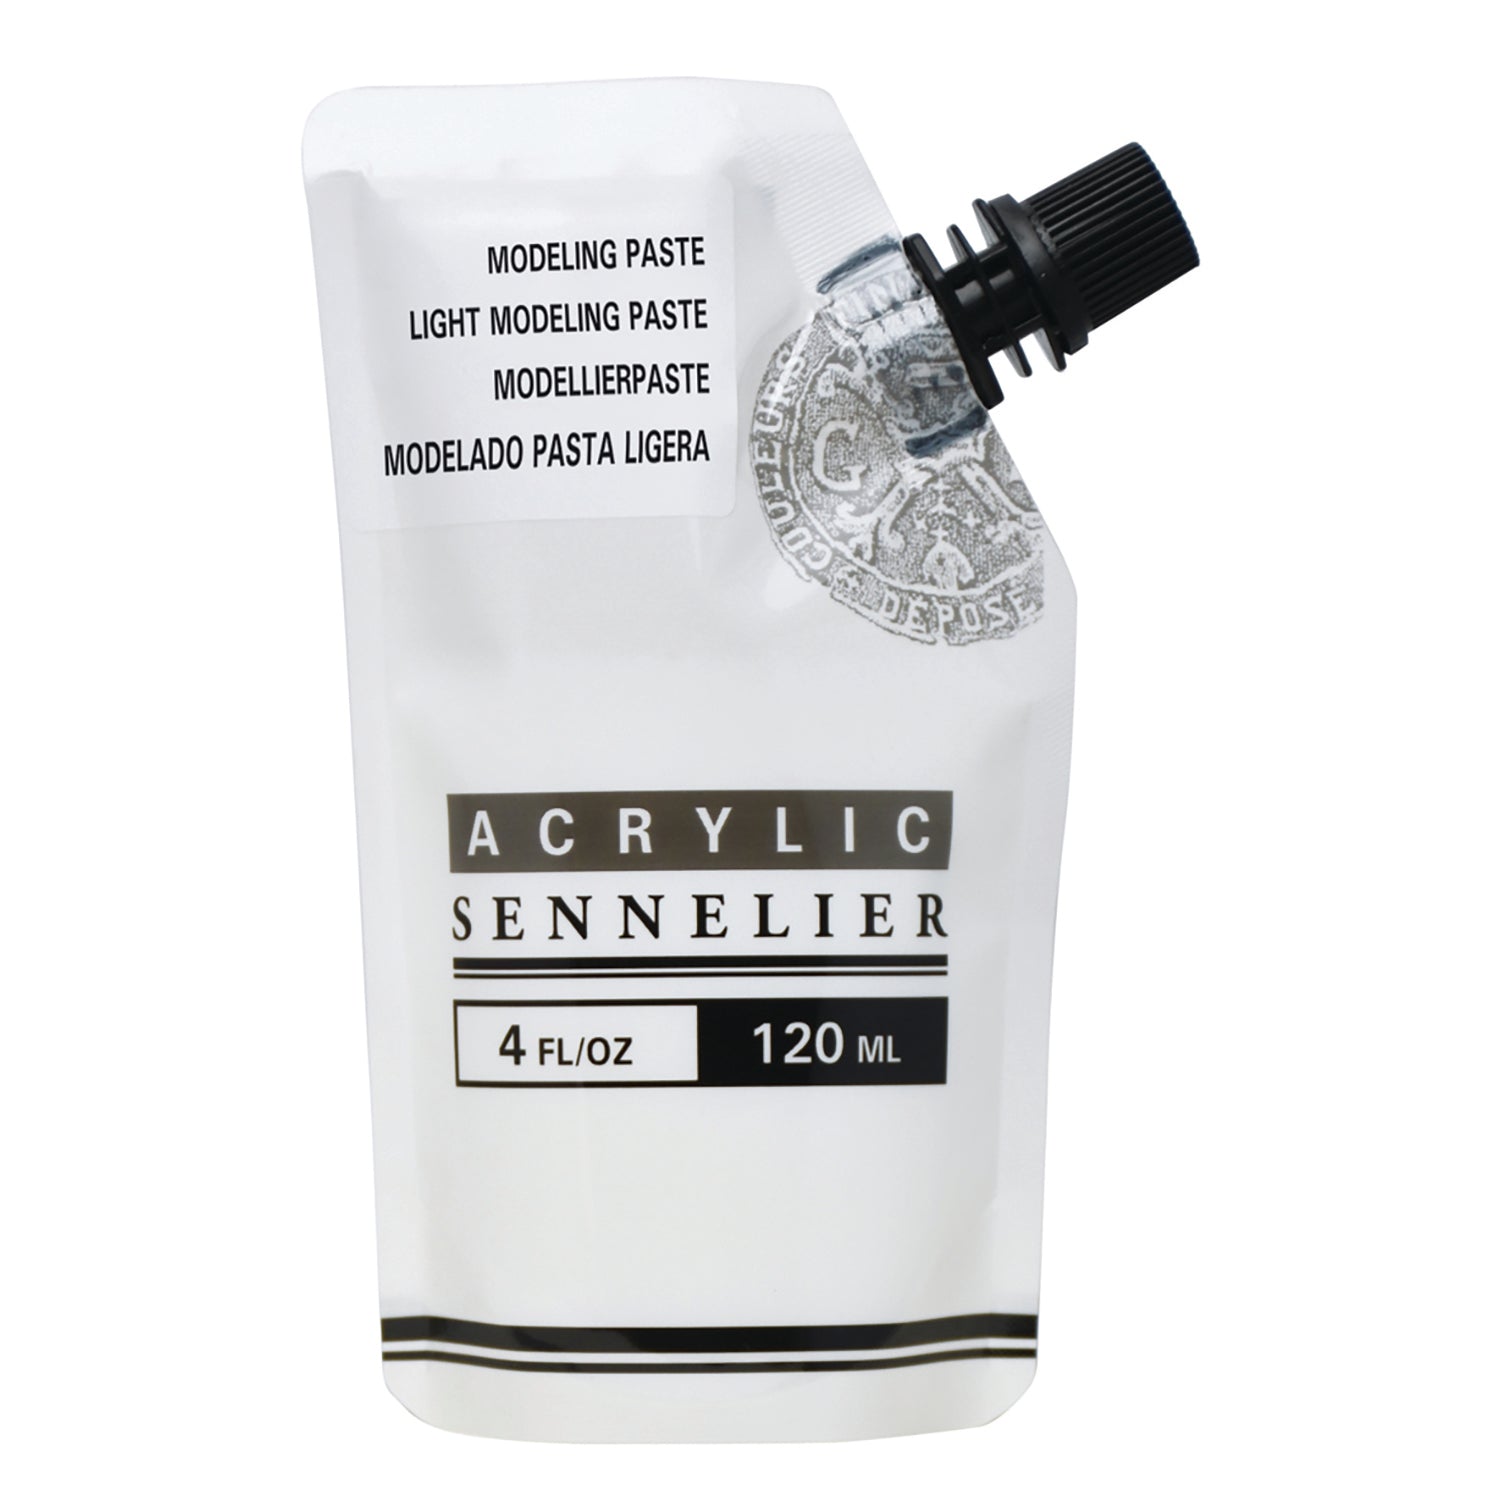 Sennelier Abstract Acrylic Modelling Paste 120ml - Melbourne Etching Supplies